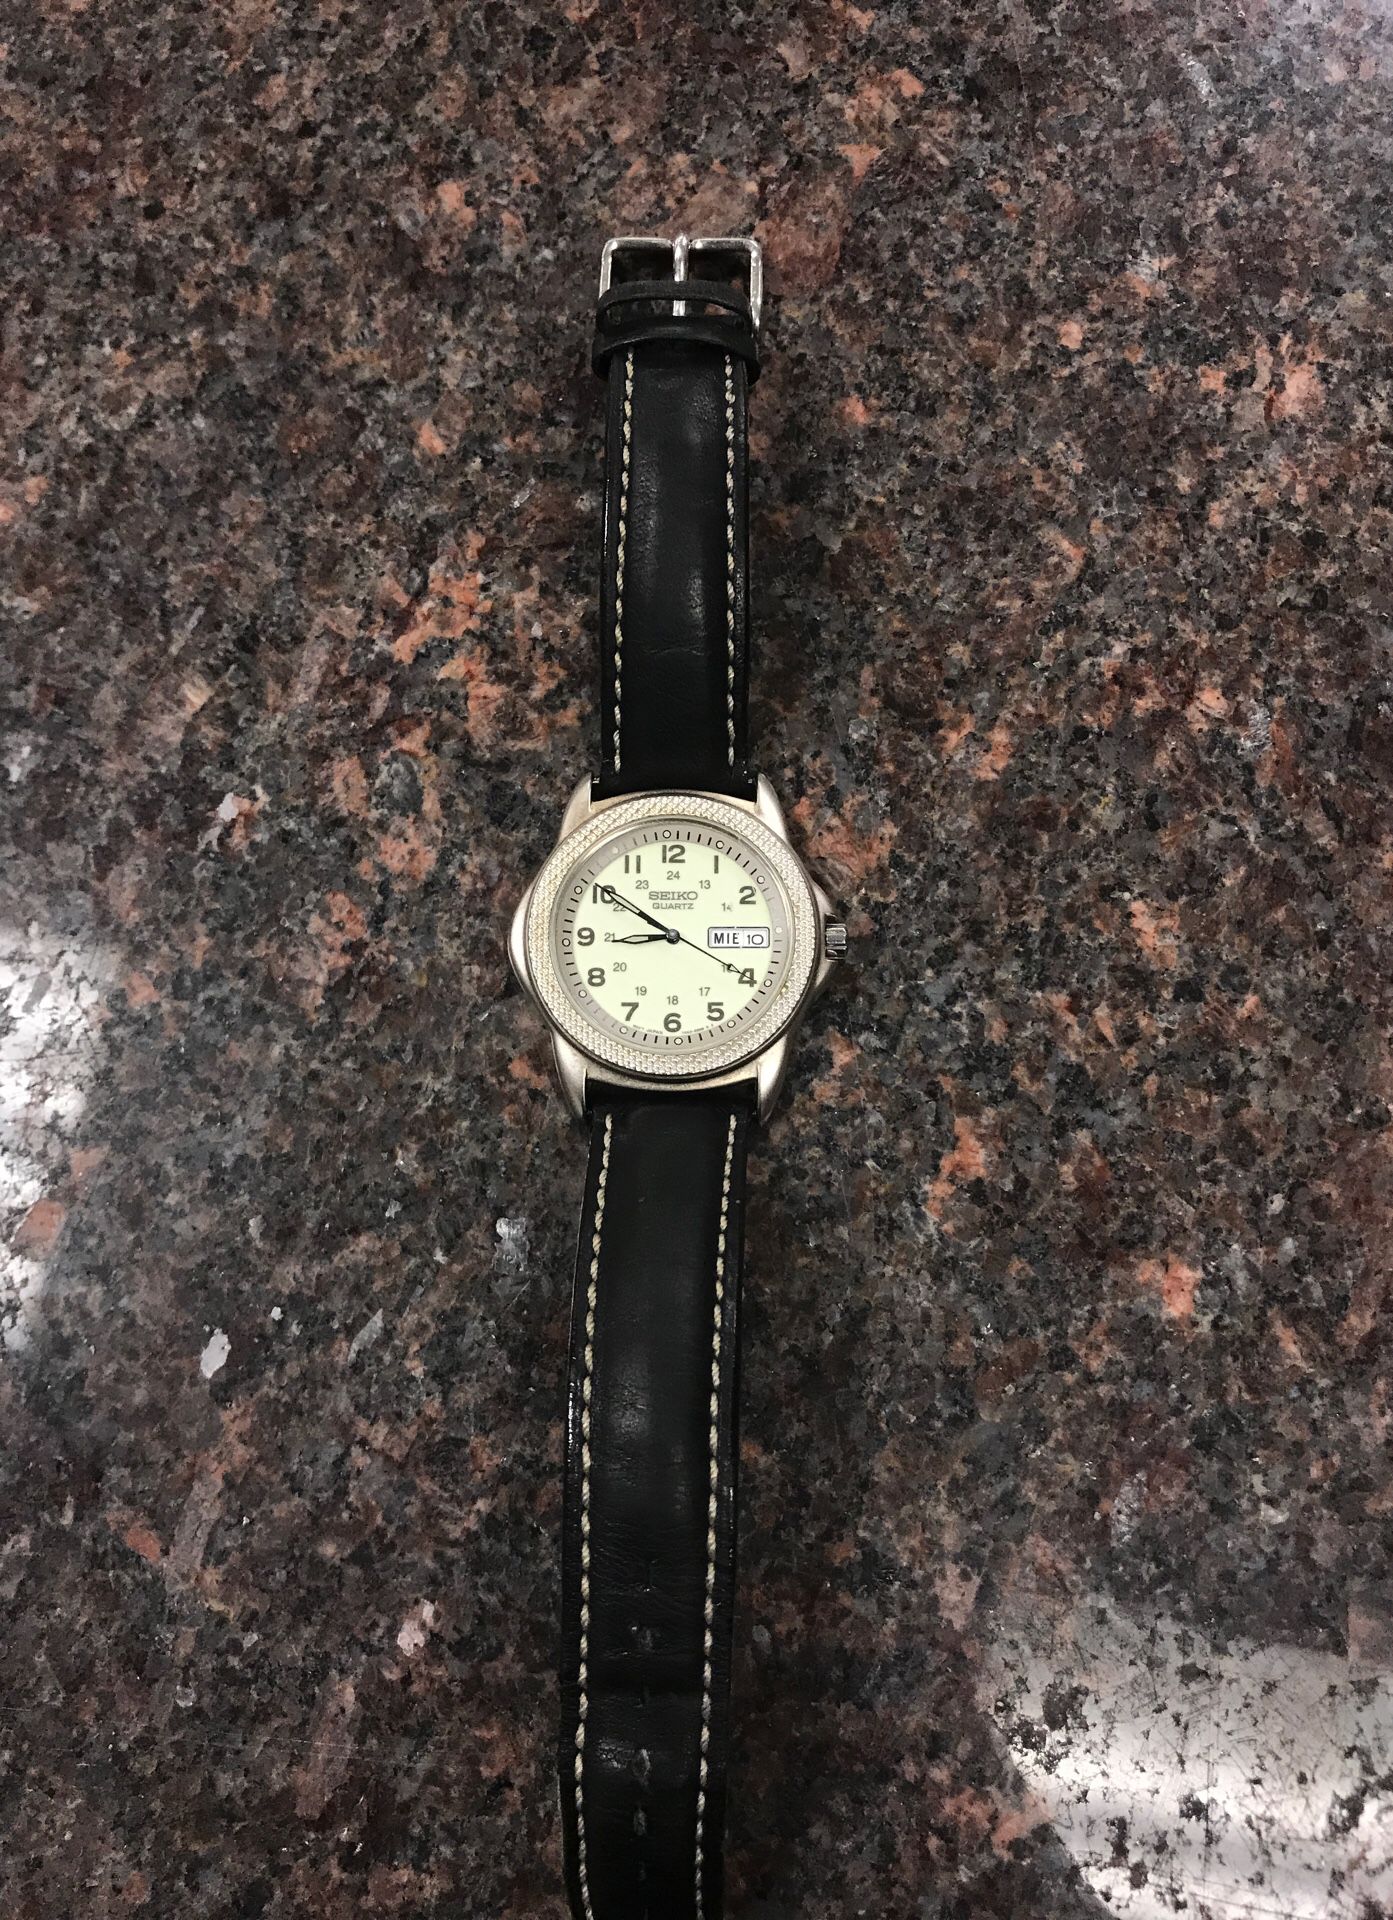 Vintage seiko men's date just watch leather band needs battery 7N43-6B20  s#681790 for Sale in Austin, TX - OfferUp